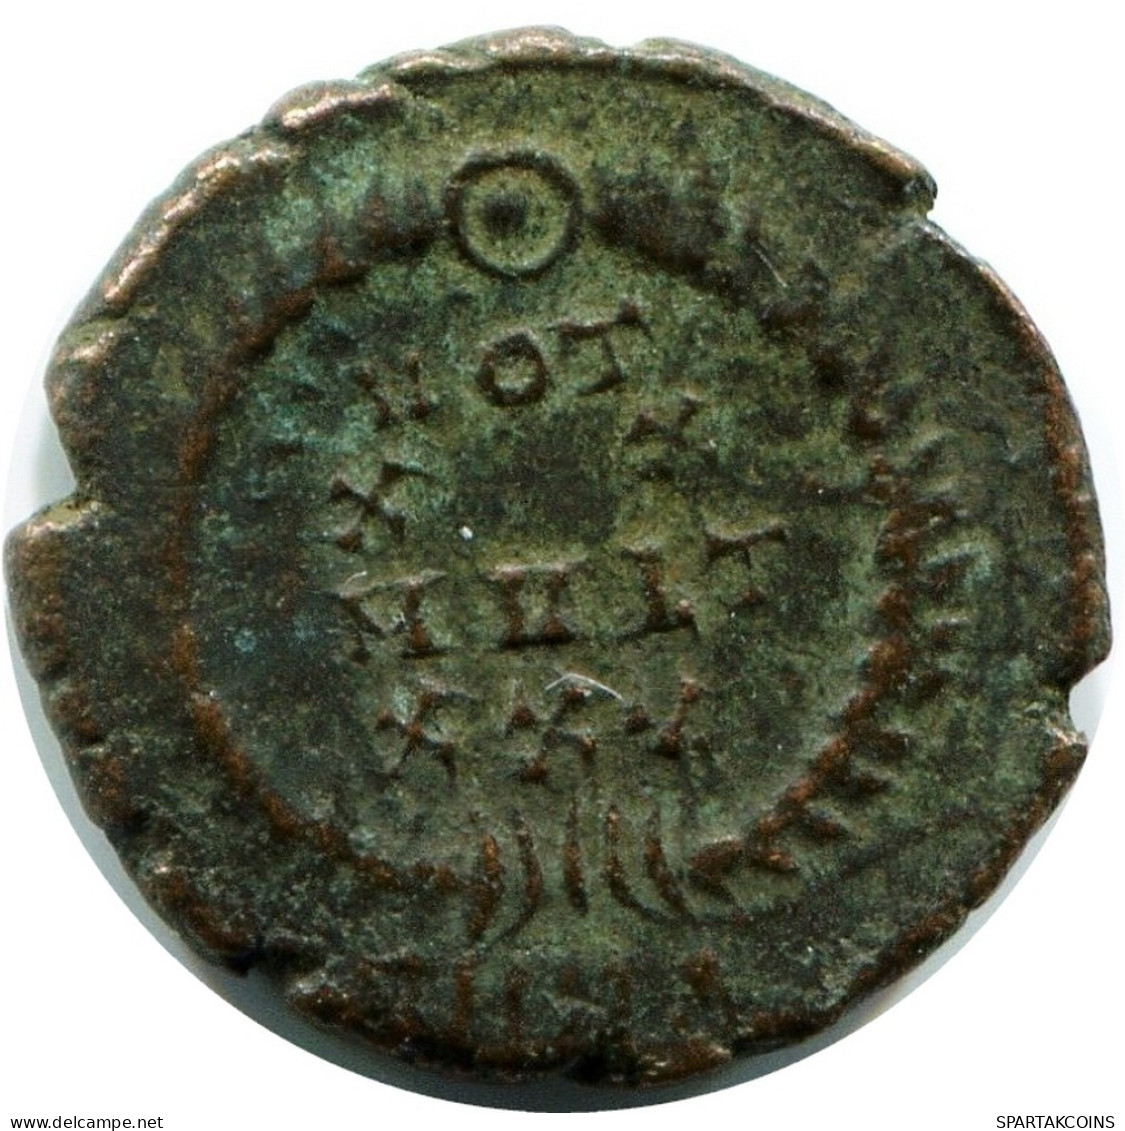 CONSTANS MINTED IN NICOMEDIA FROM THE ROYAL ONTARIO MUSEUM #ANC11768.14.D.A - El Impero Christiano (307 / 363)